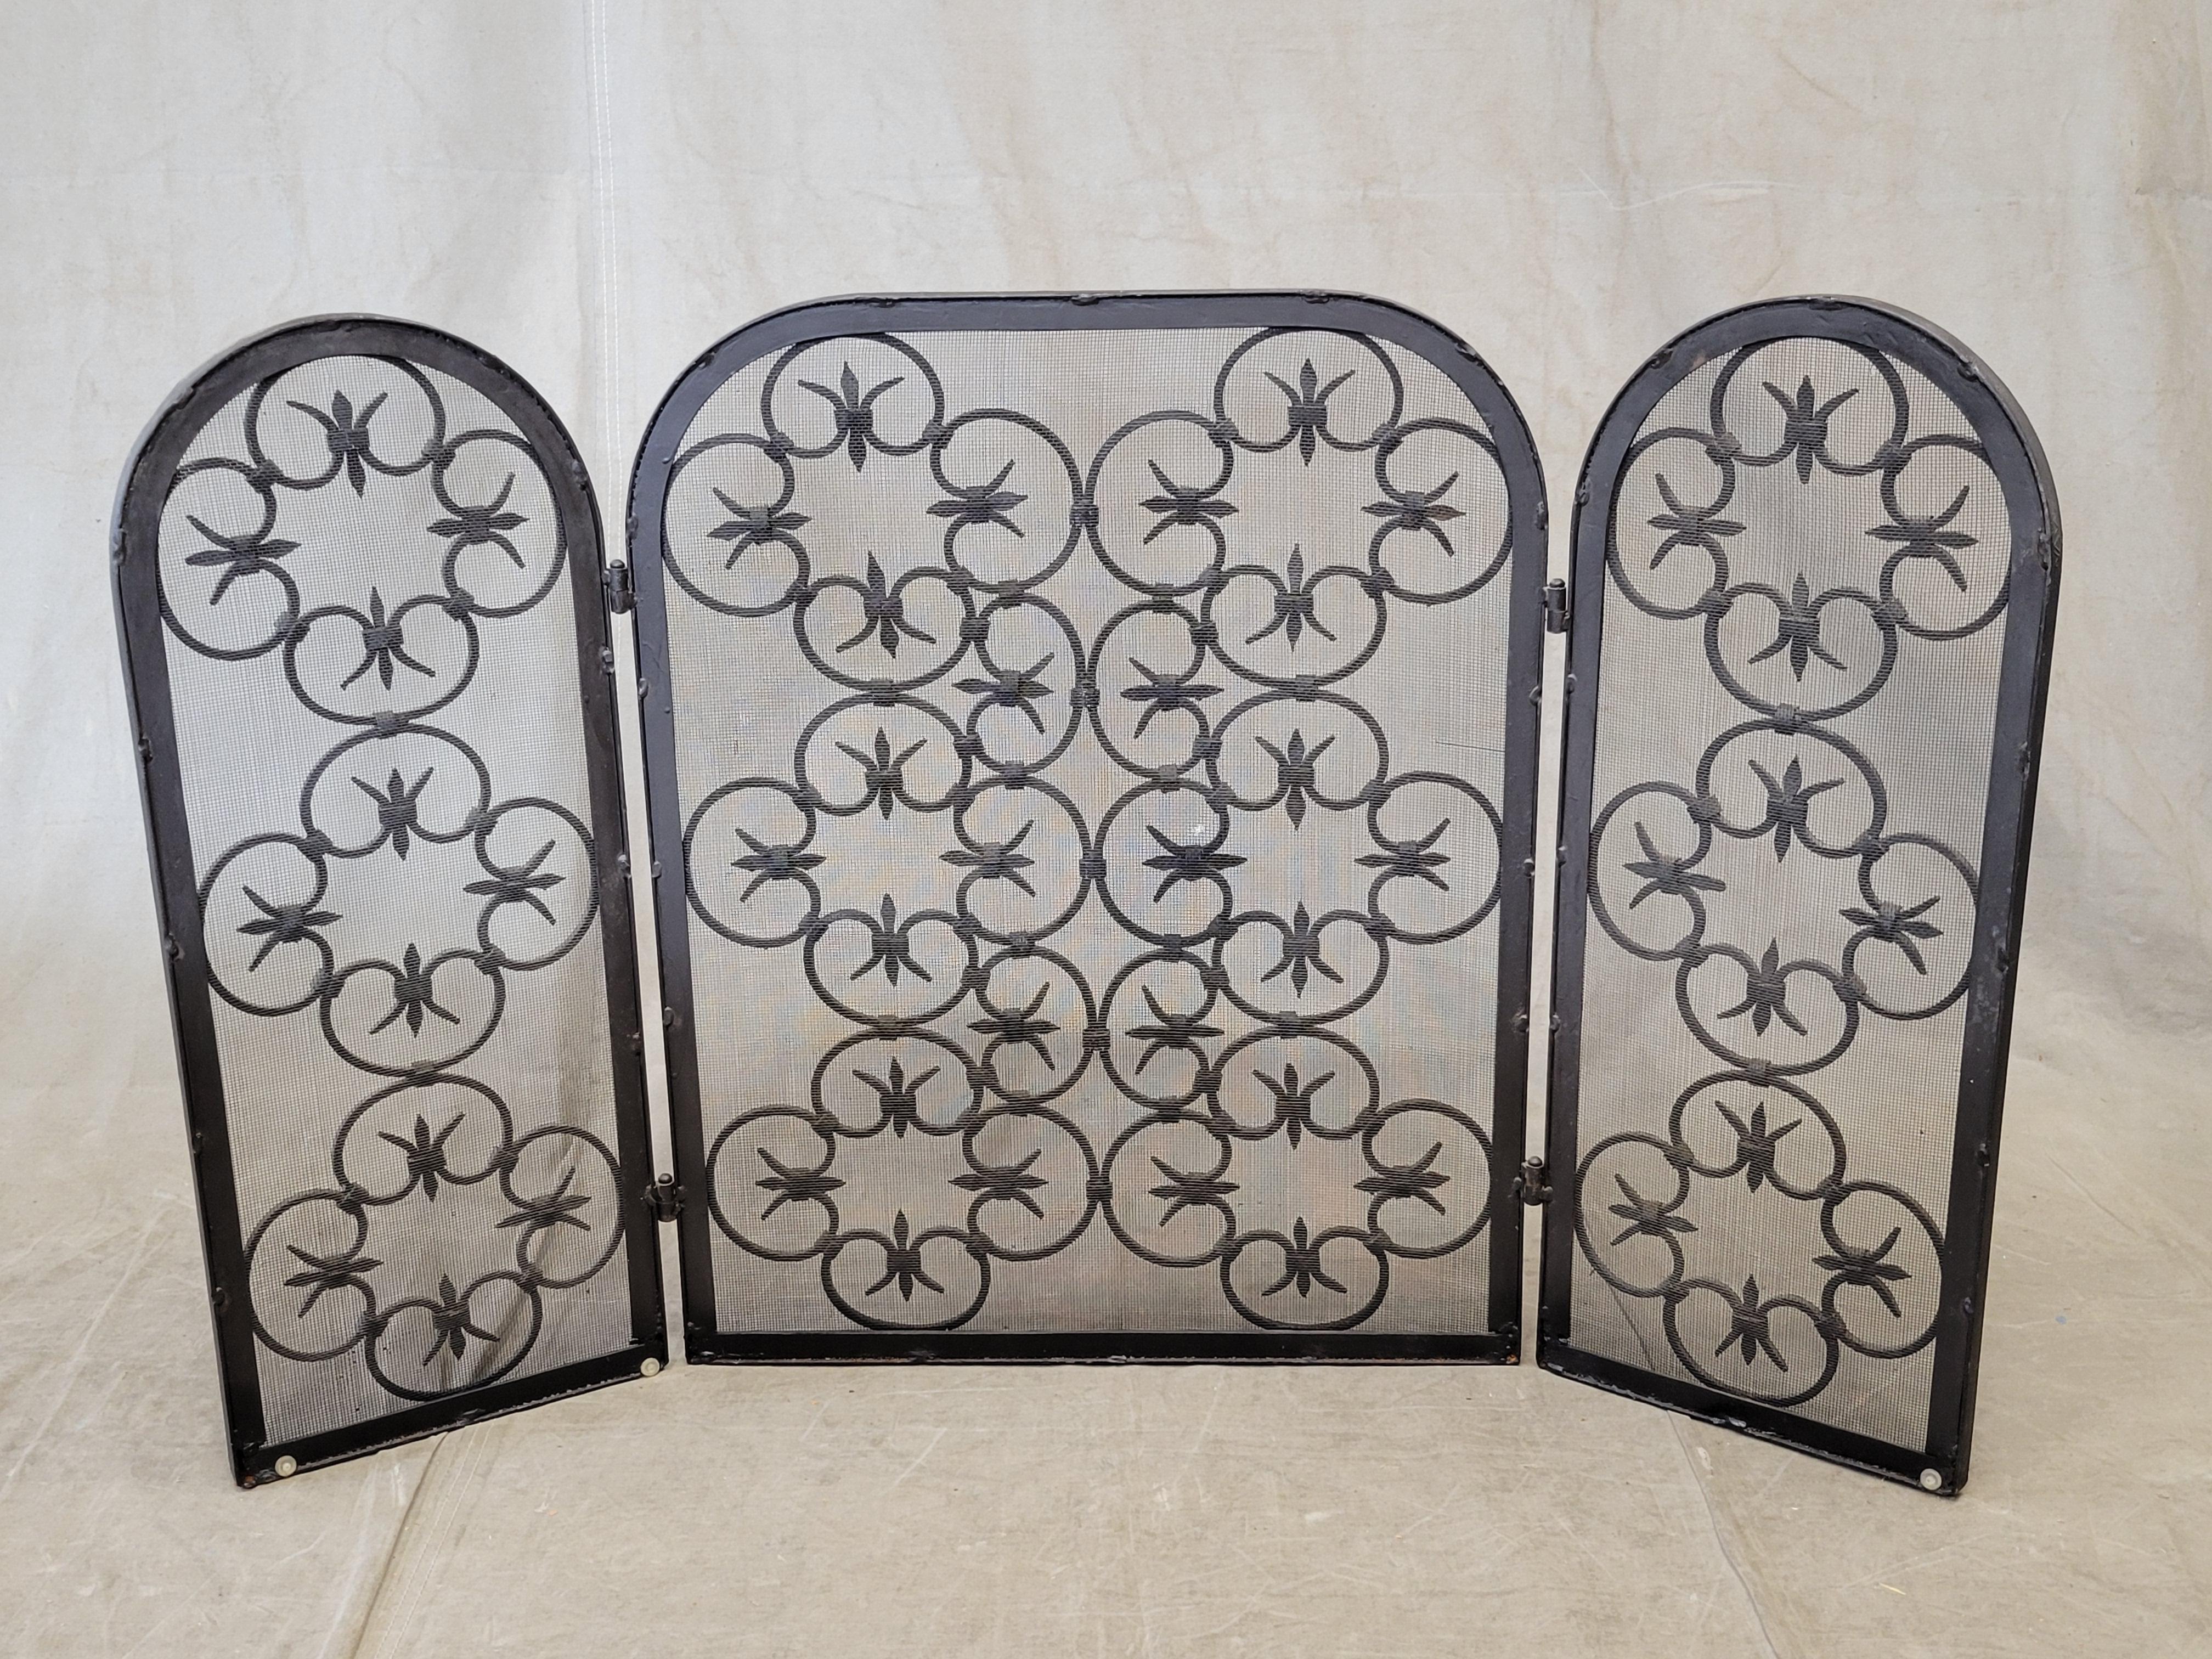 Vintage Spanish Revival Iron Three Panel Folding Fireplace Screen For Sale 5